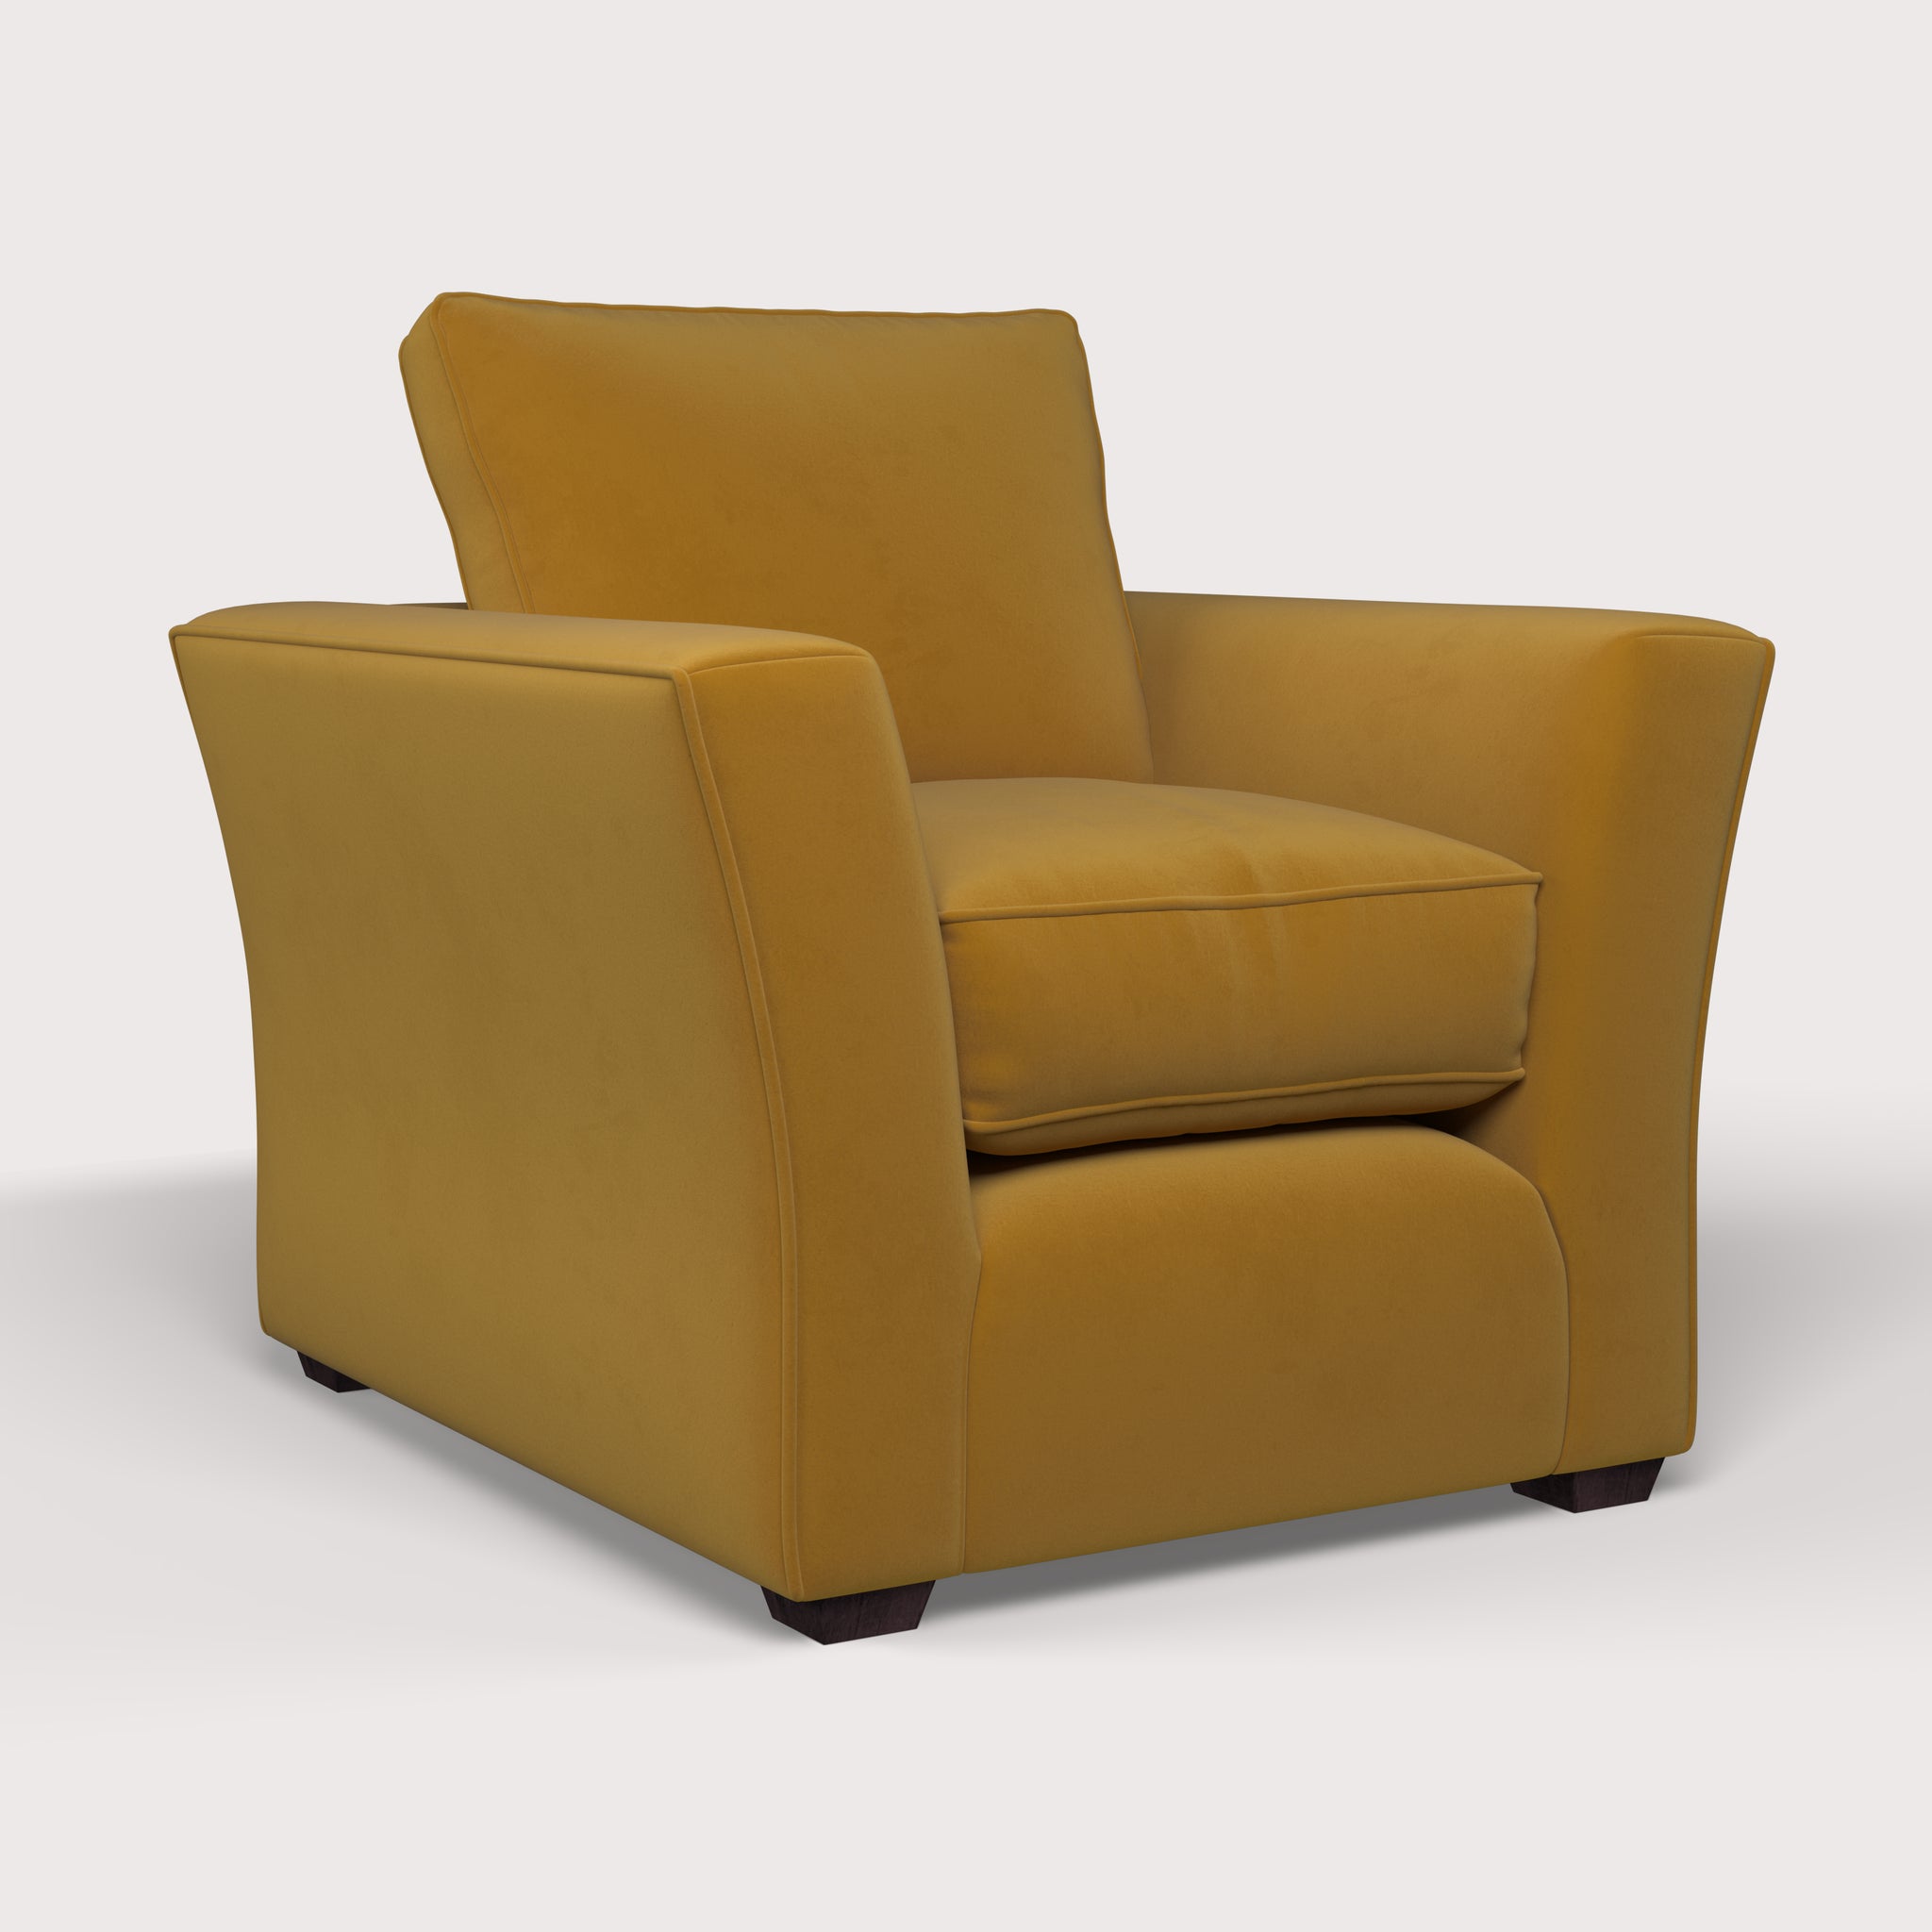 The Lawrence Armchair